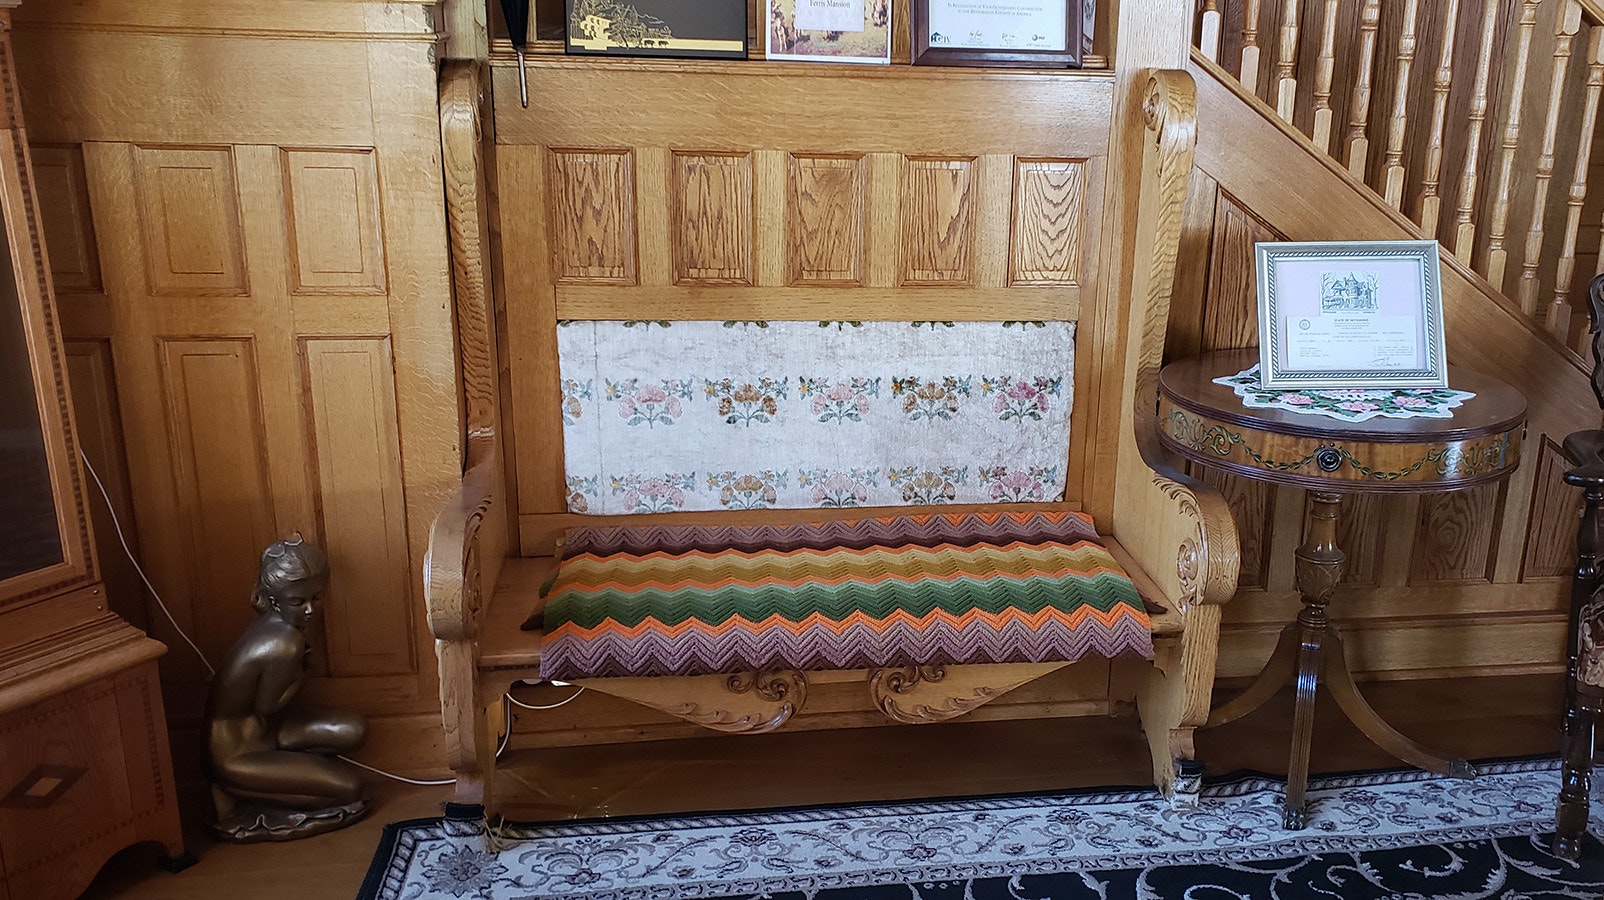 A built-in bench in the entryway of the Ferris Mansion in Rawlins.